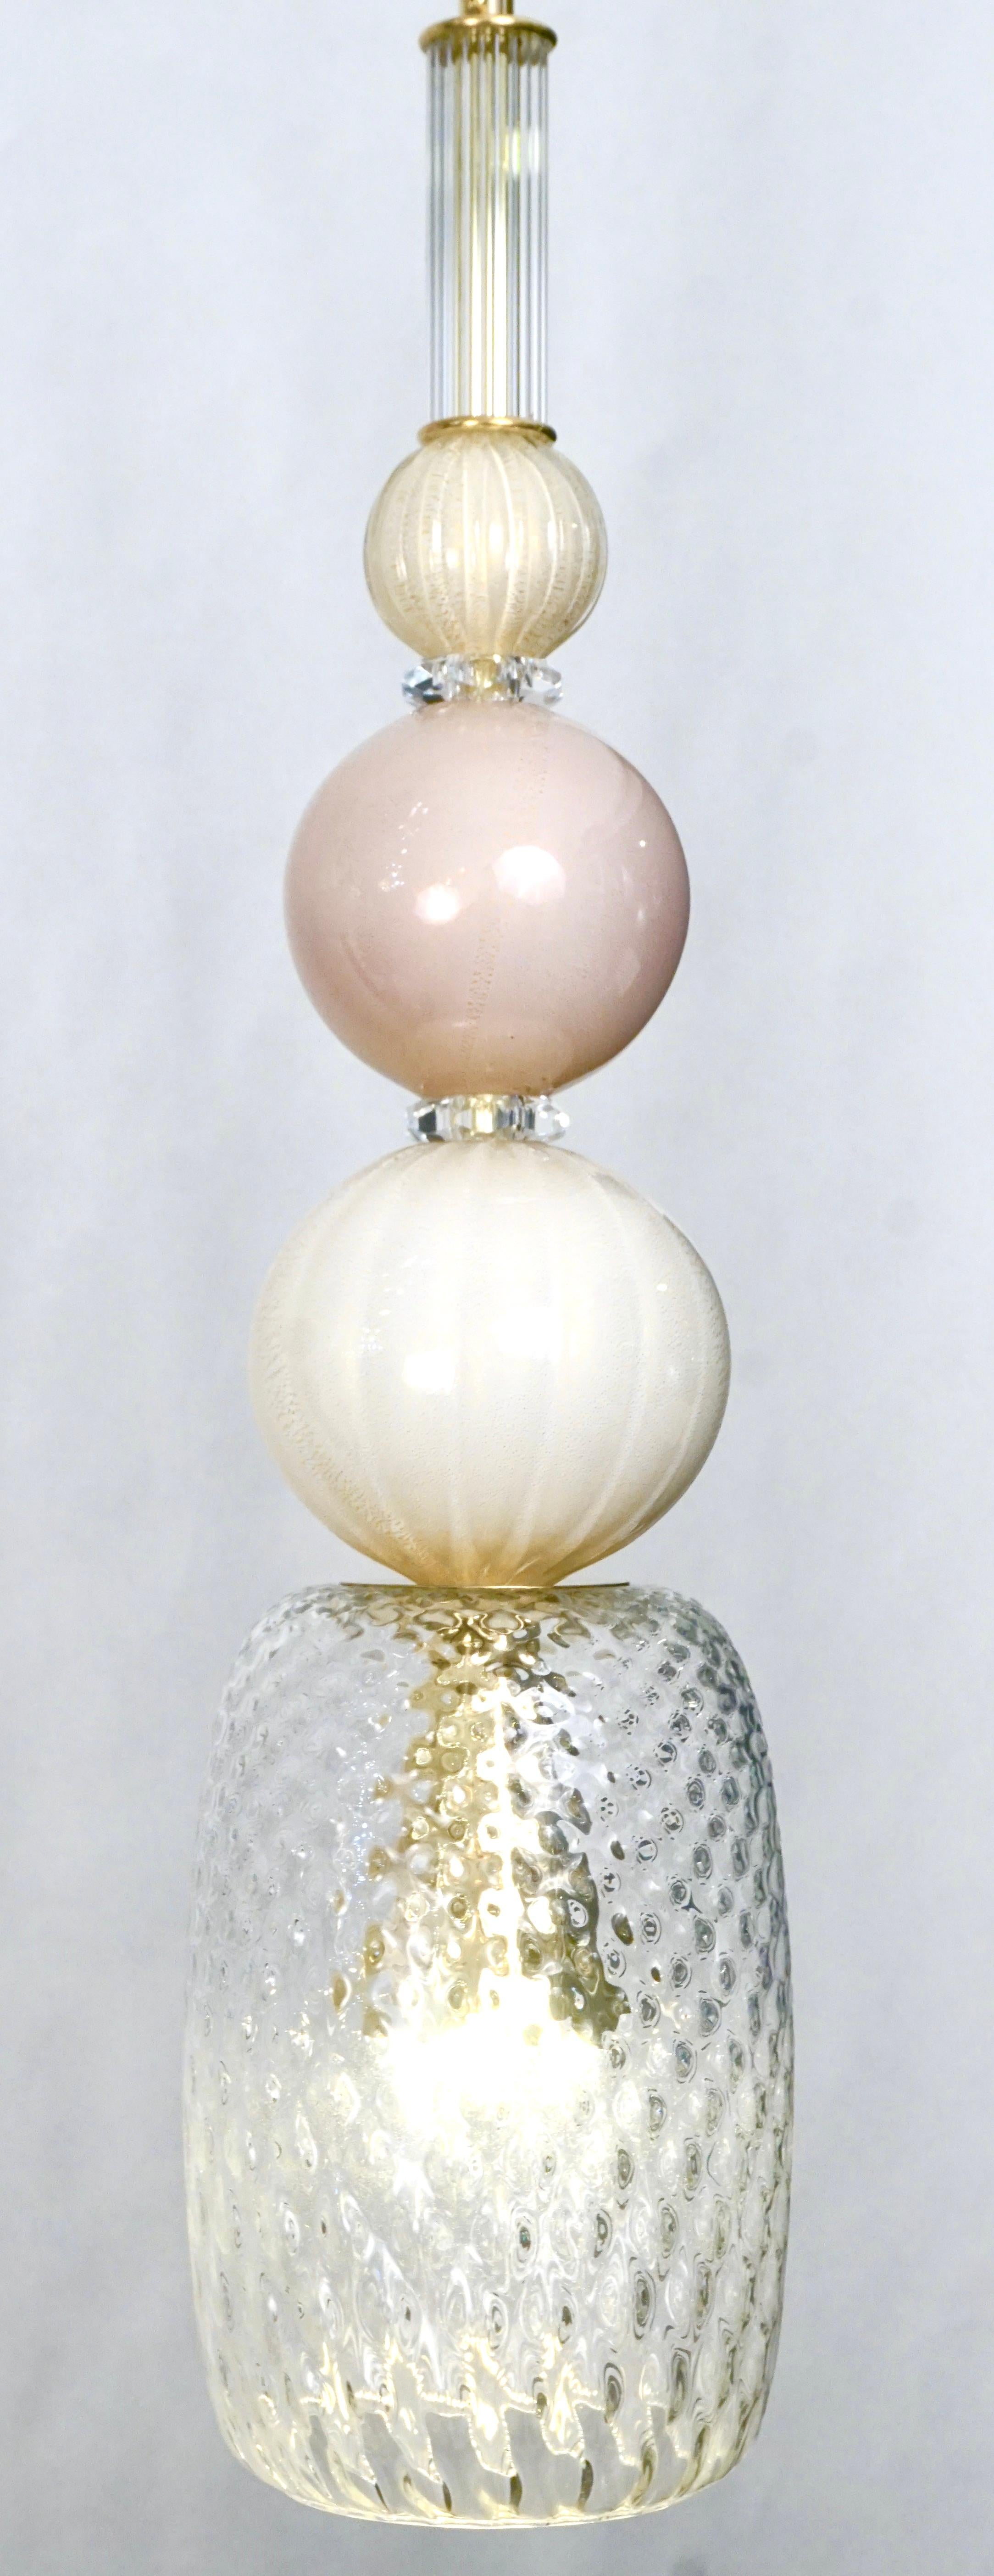 Fun and elegant Italian lantern chandelier, entirely handcrafted, of organic modern design consisting of a succession of elements: reeded crystal Murano glass cylinder, opaline rose pink blush and ivory white glass spheres overlaid in clear crystal